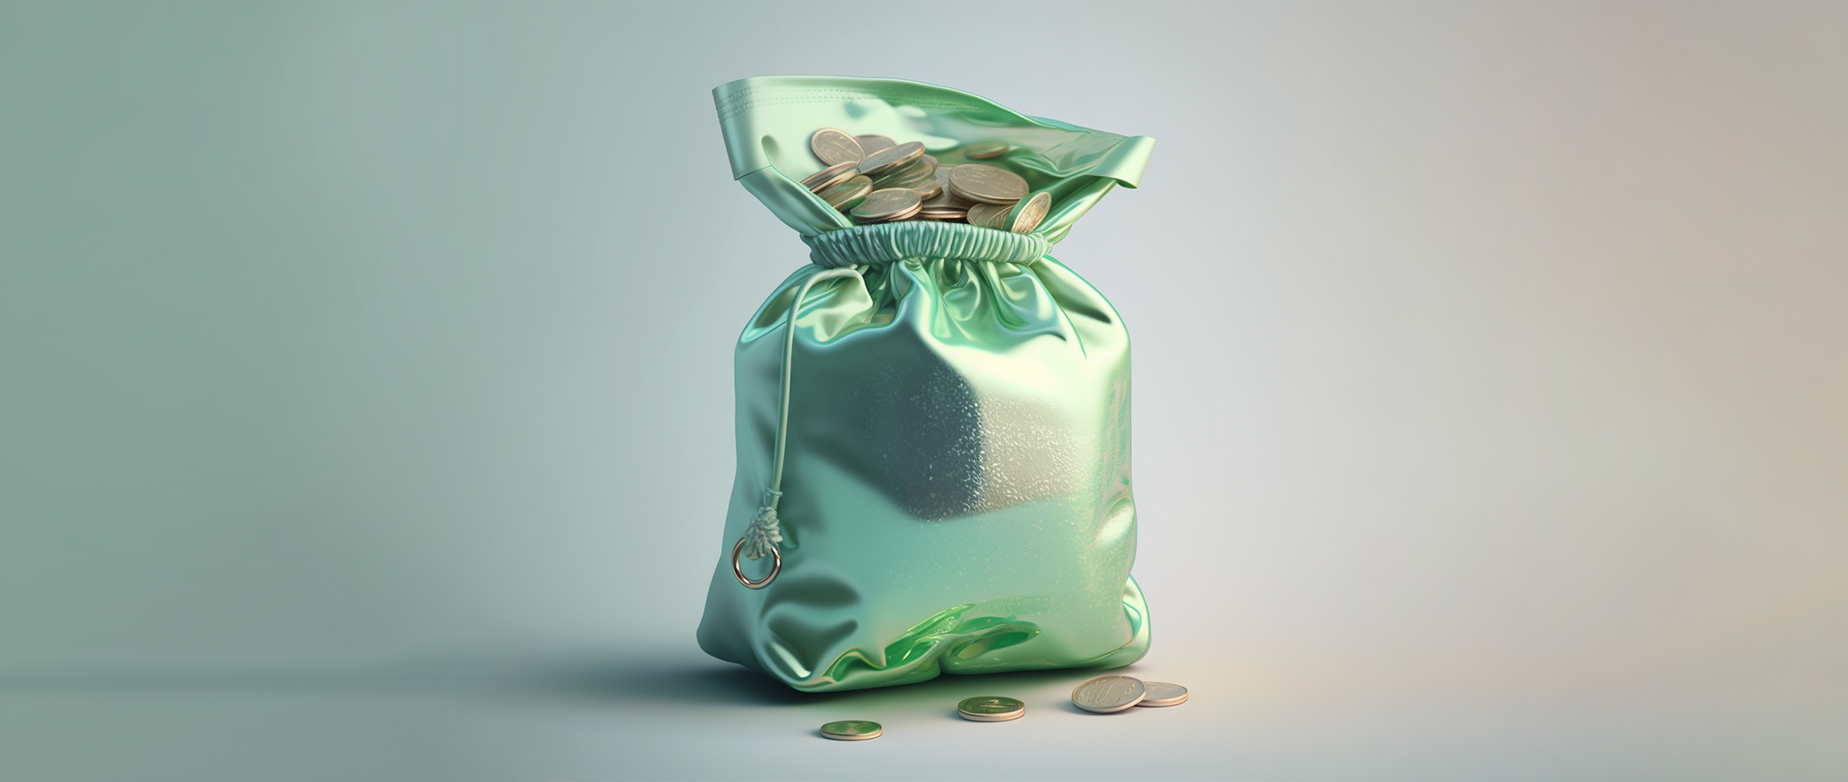 Bag of coins